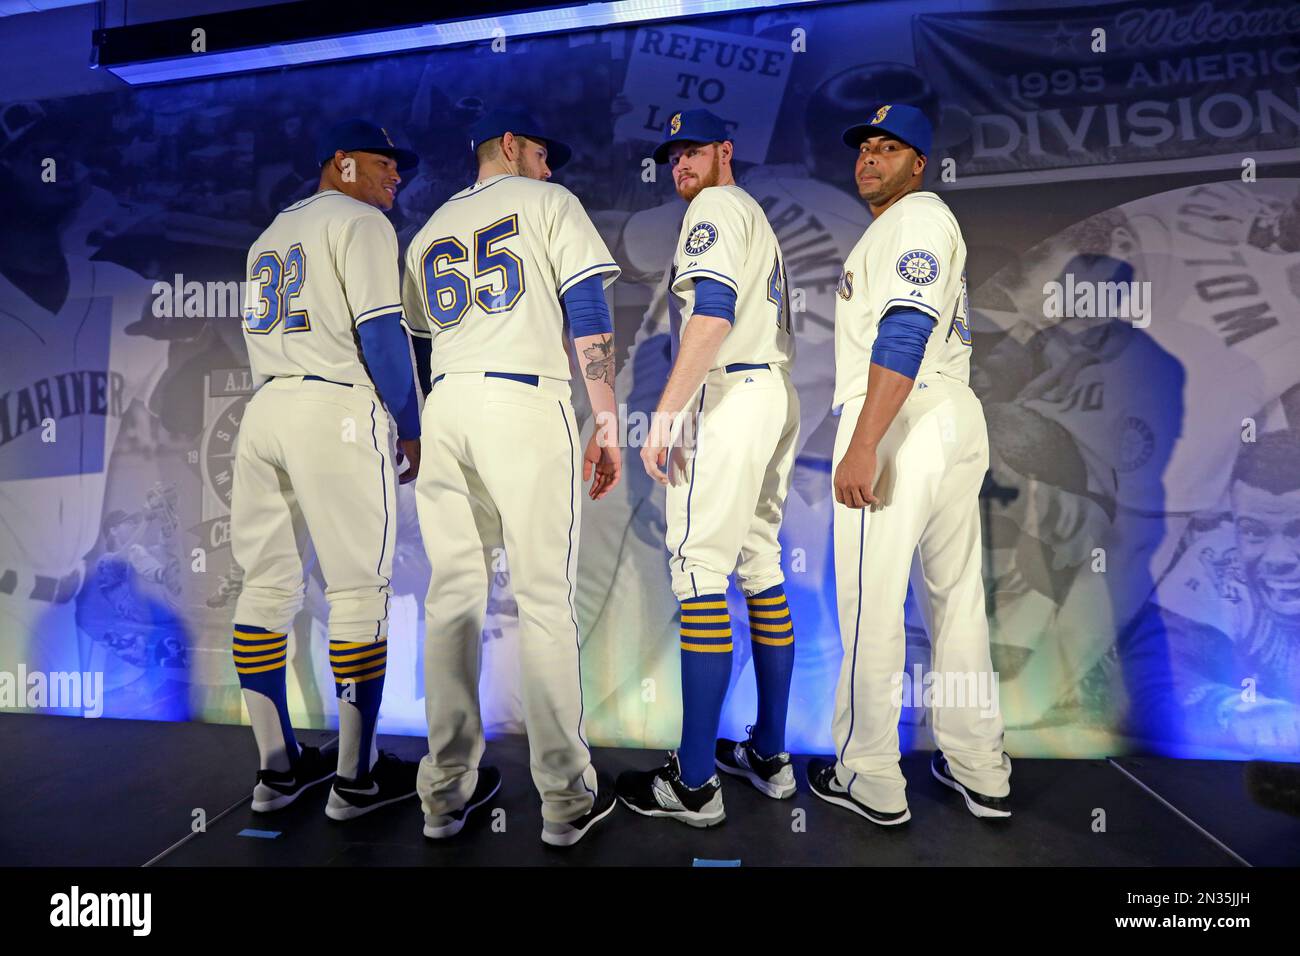 The Mariner's will be in their new Sunday alternate uniforms for